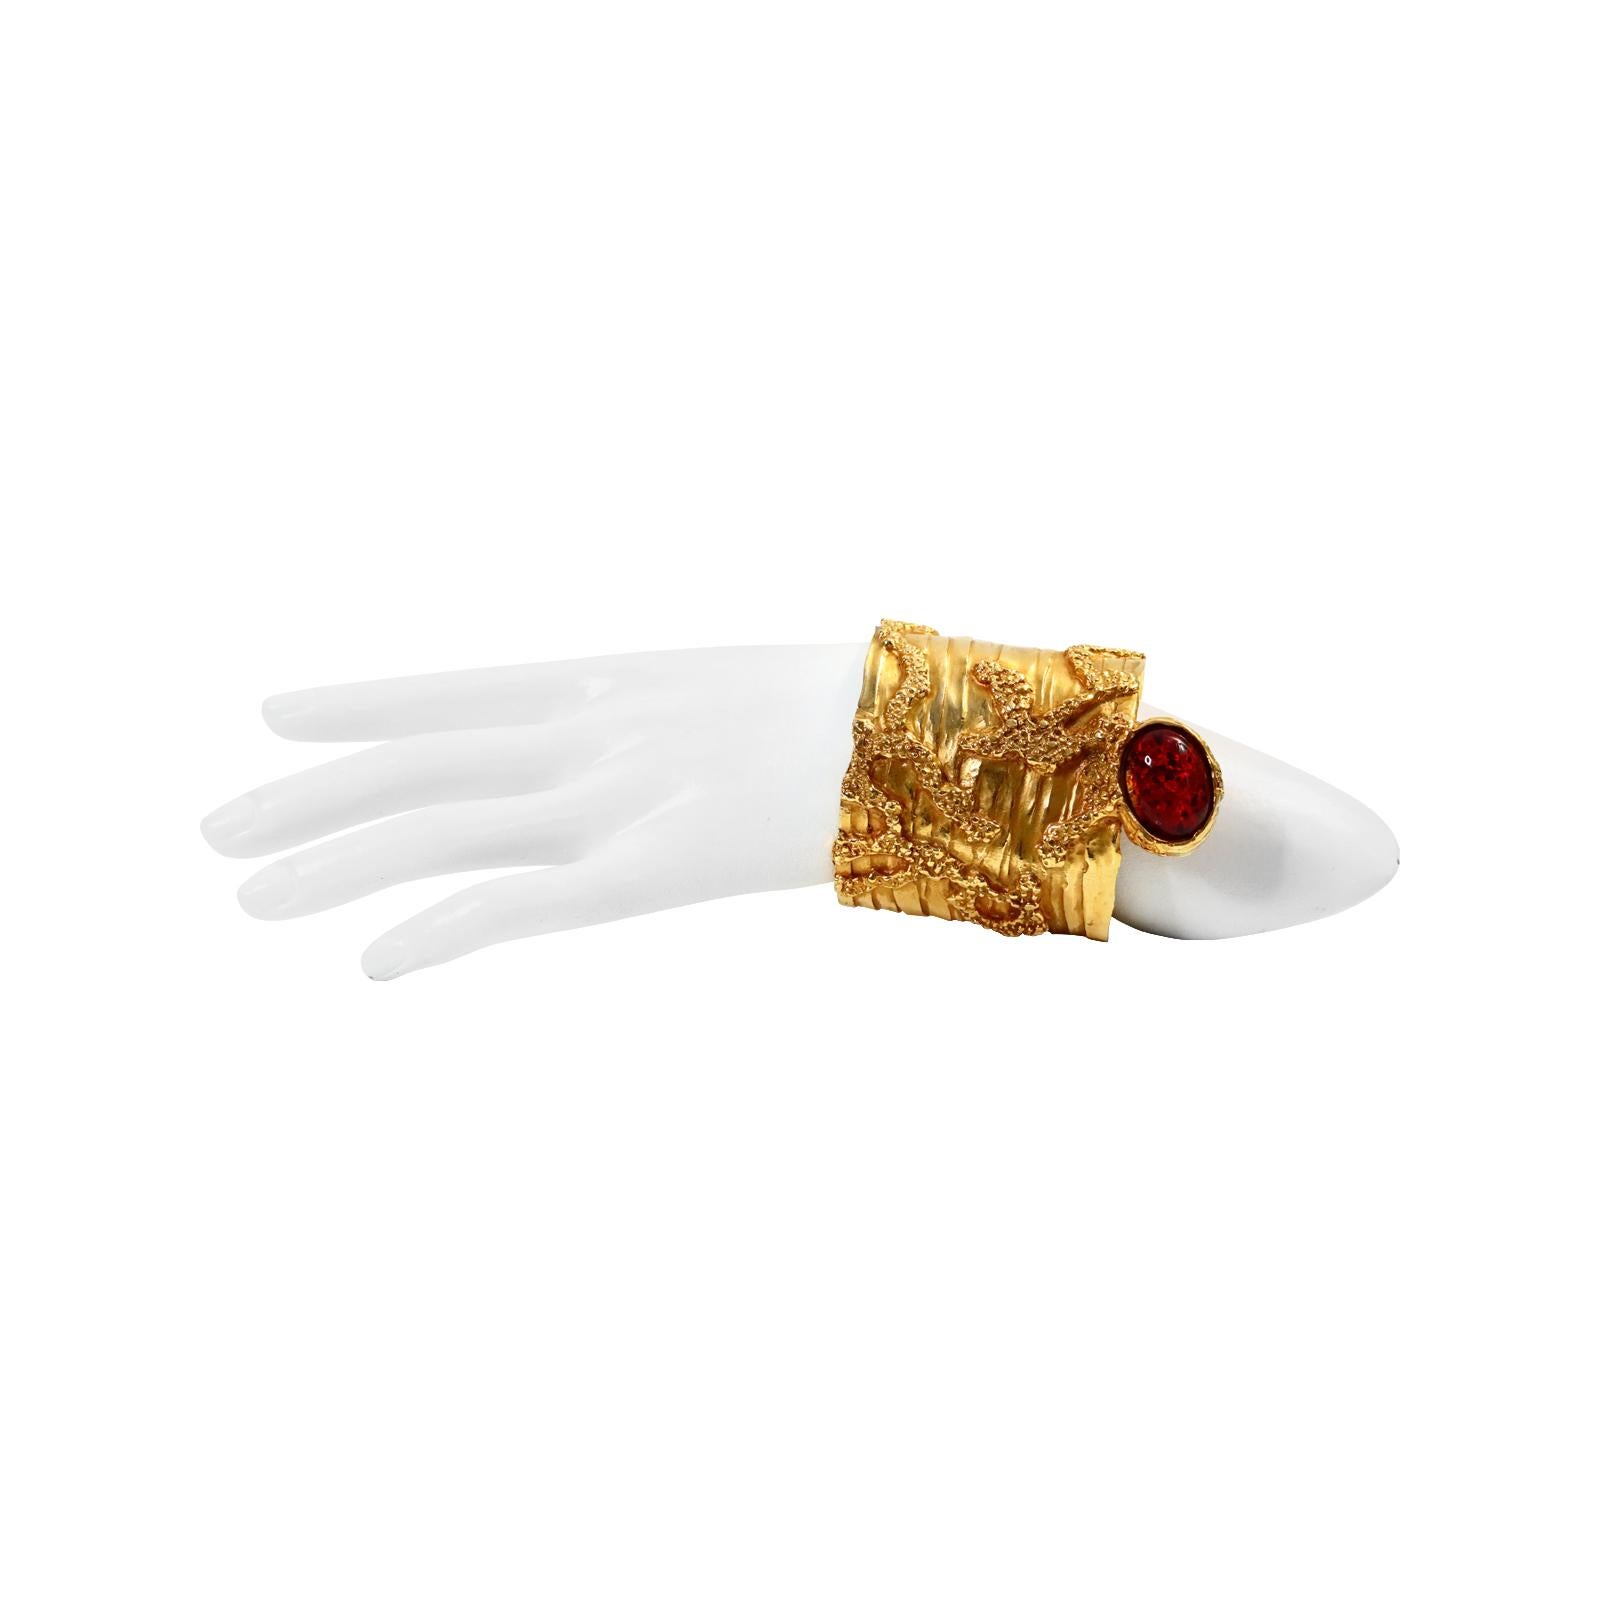 Artist Vintage YSL Gold with Red Pate De Vere Cuff circa 2000s For Sale